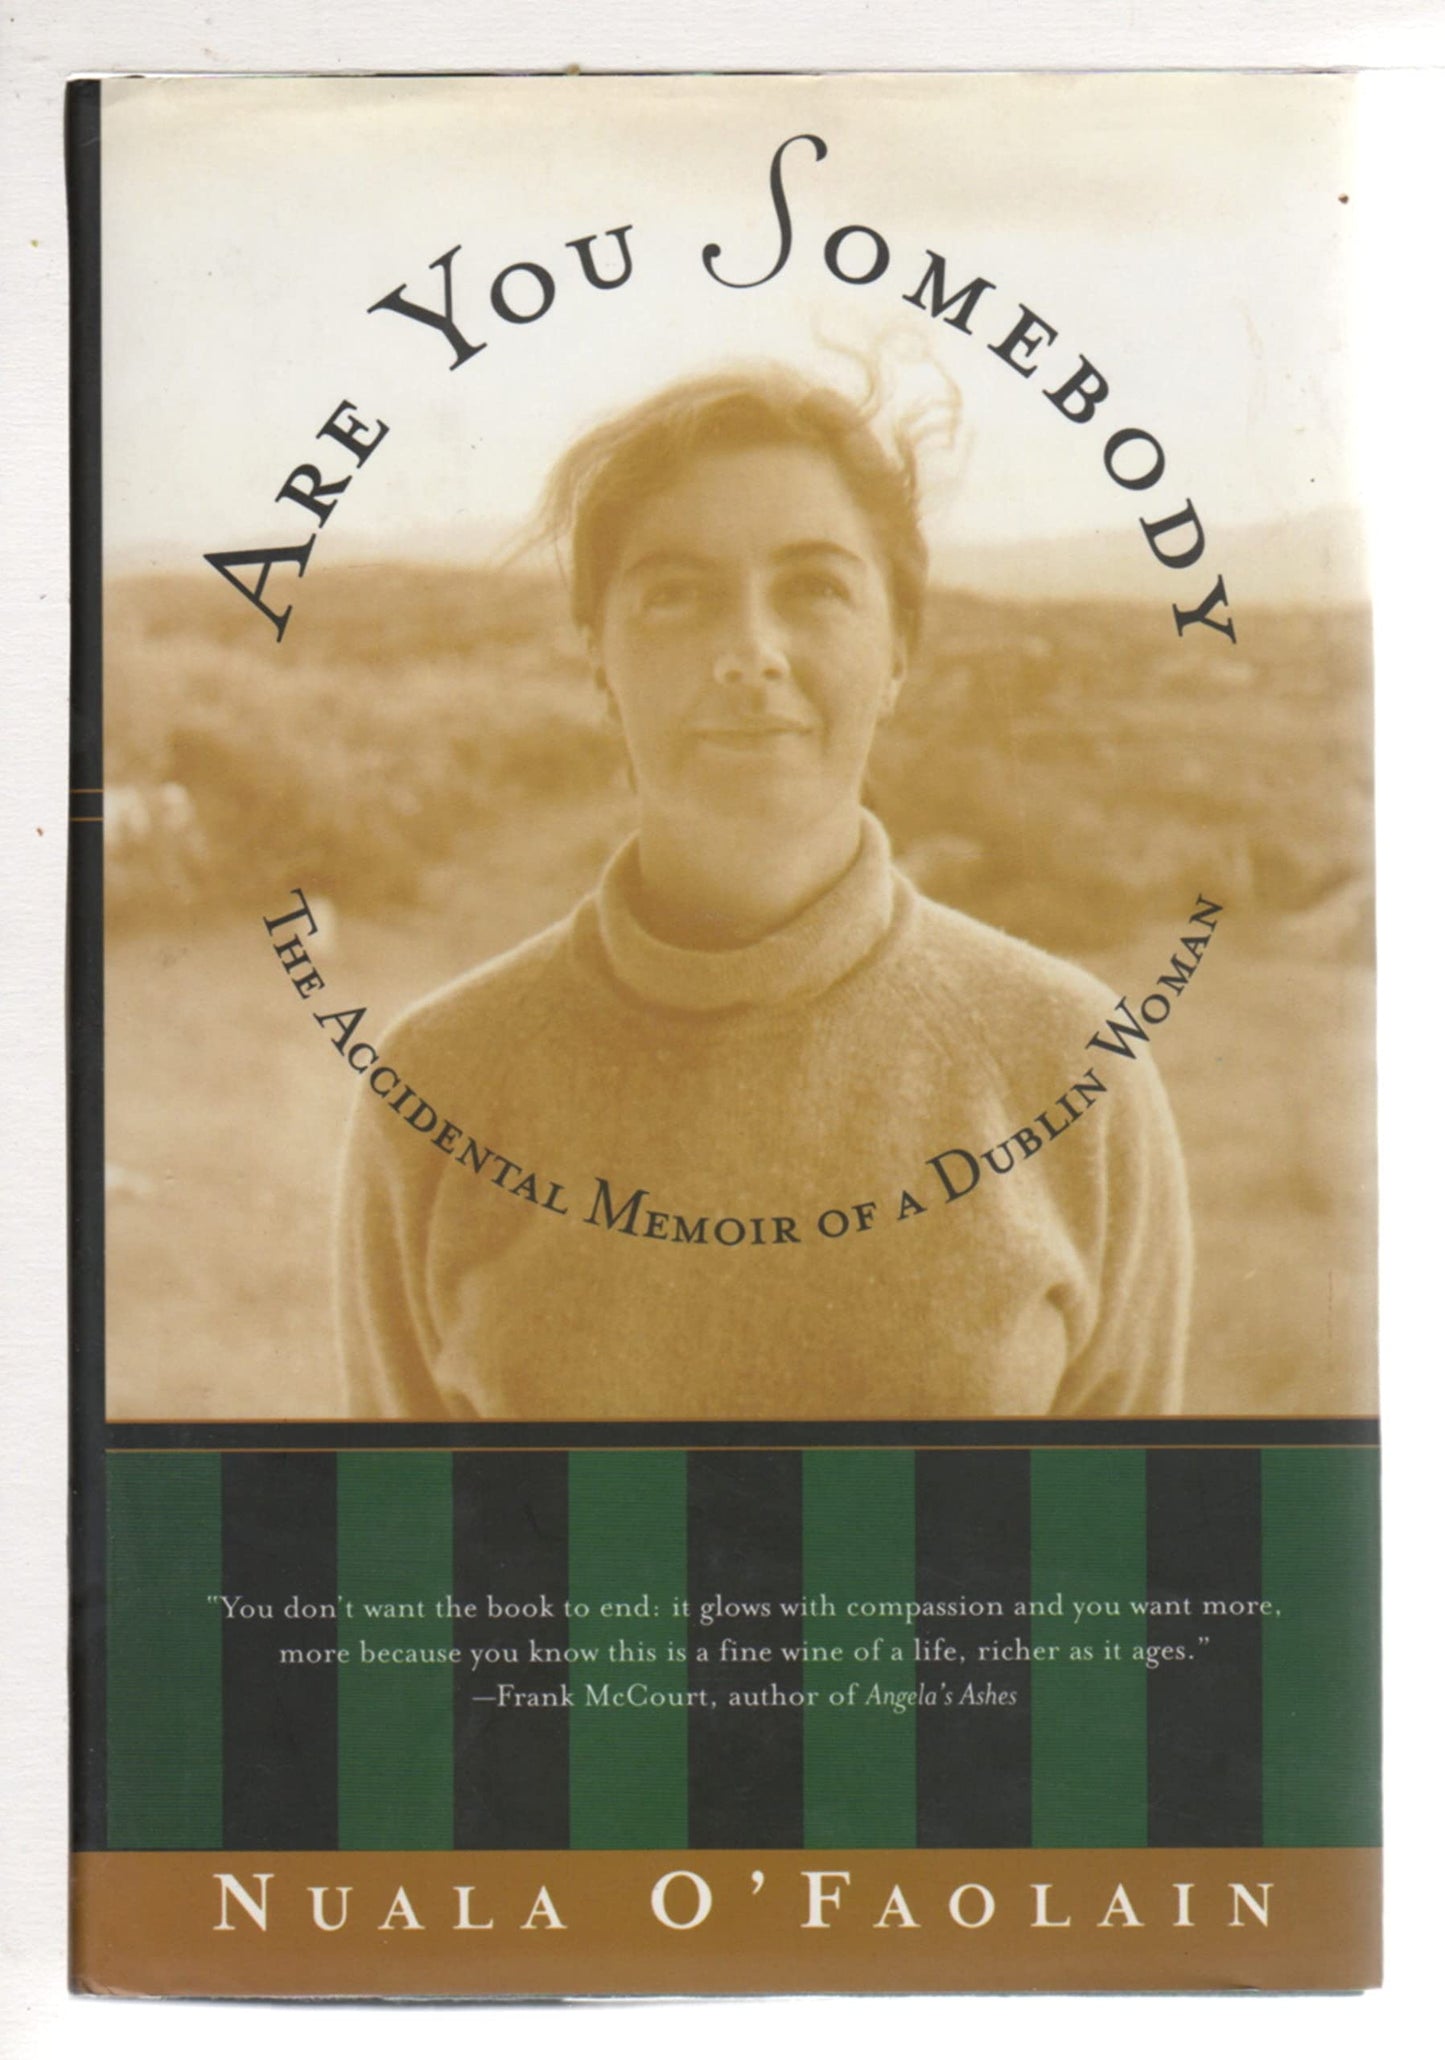 Are You Somebody: The Accidental Memoir of a Dublin Woman (American)